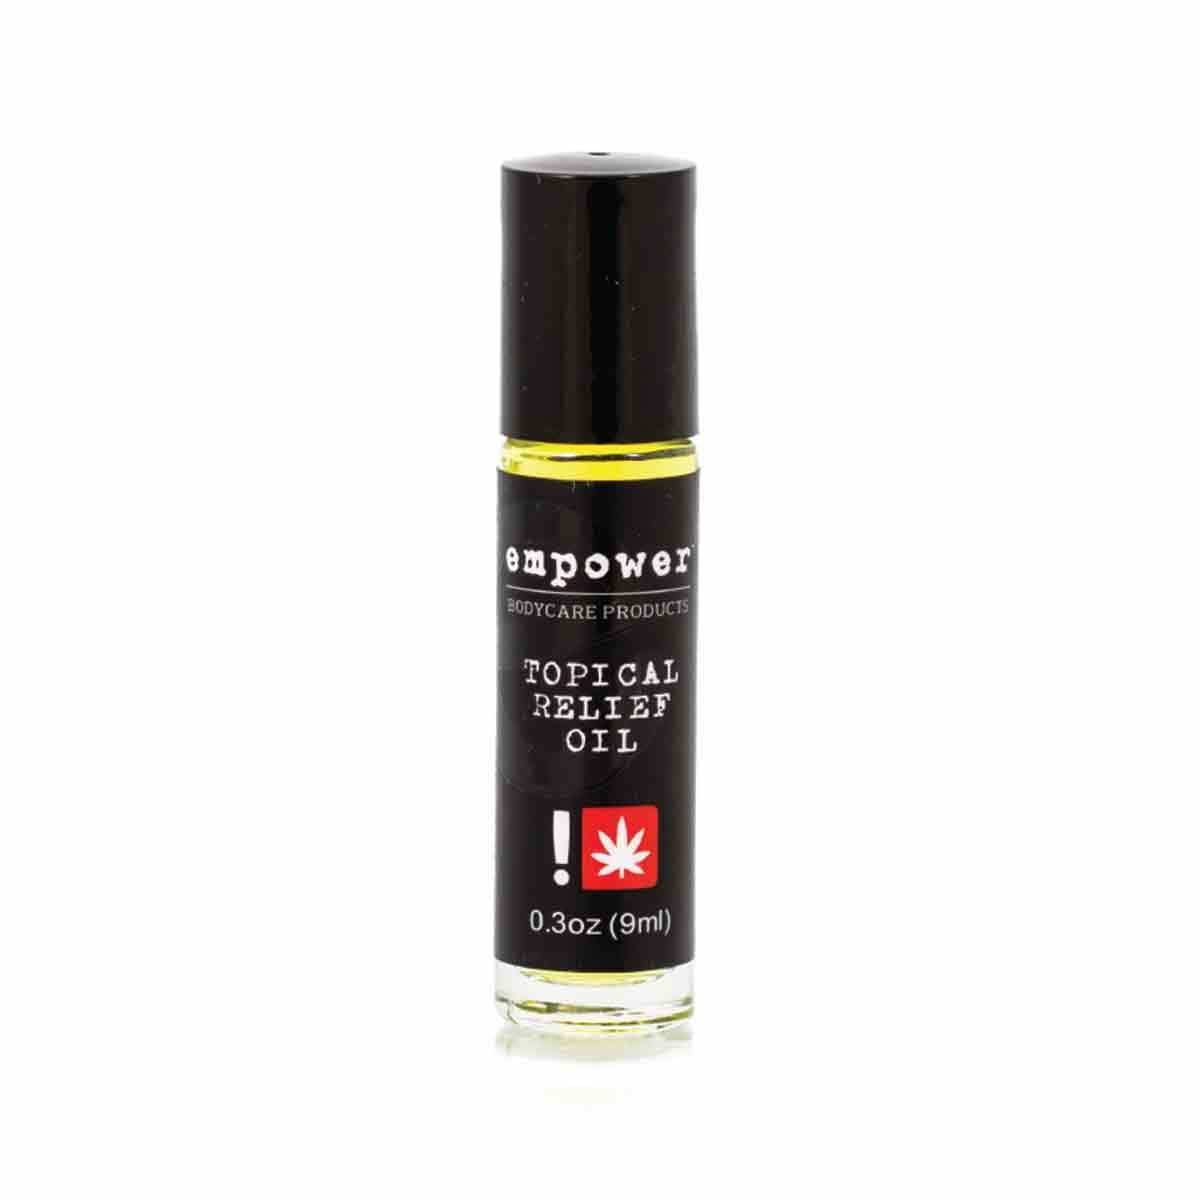 topicals-empower-empowerar-topical-relief-oil-black-label-9ml